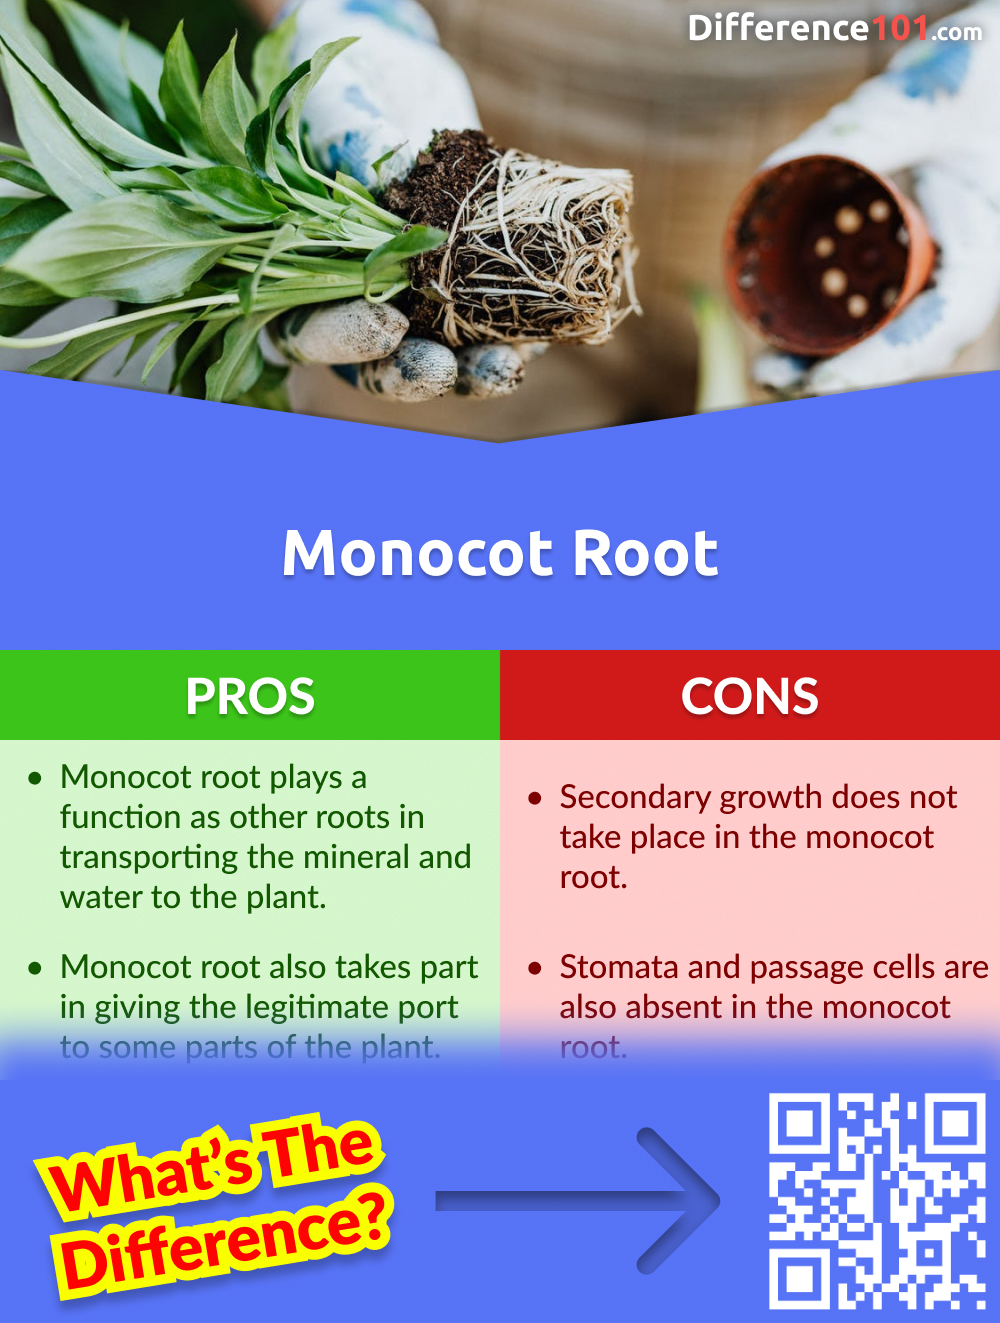 Monocot Root Pros and Cons